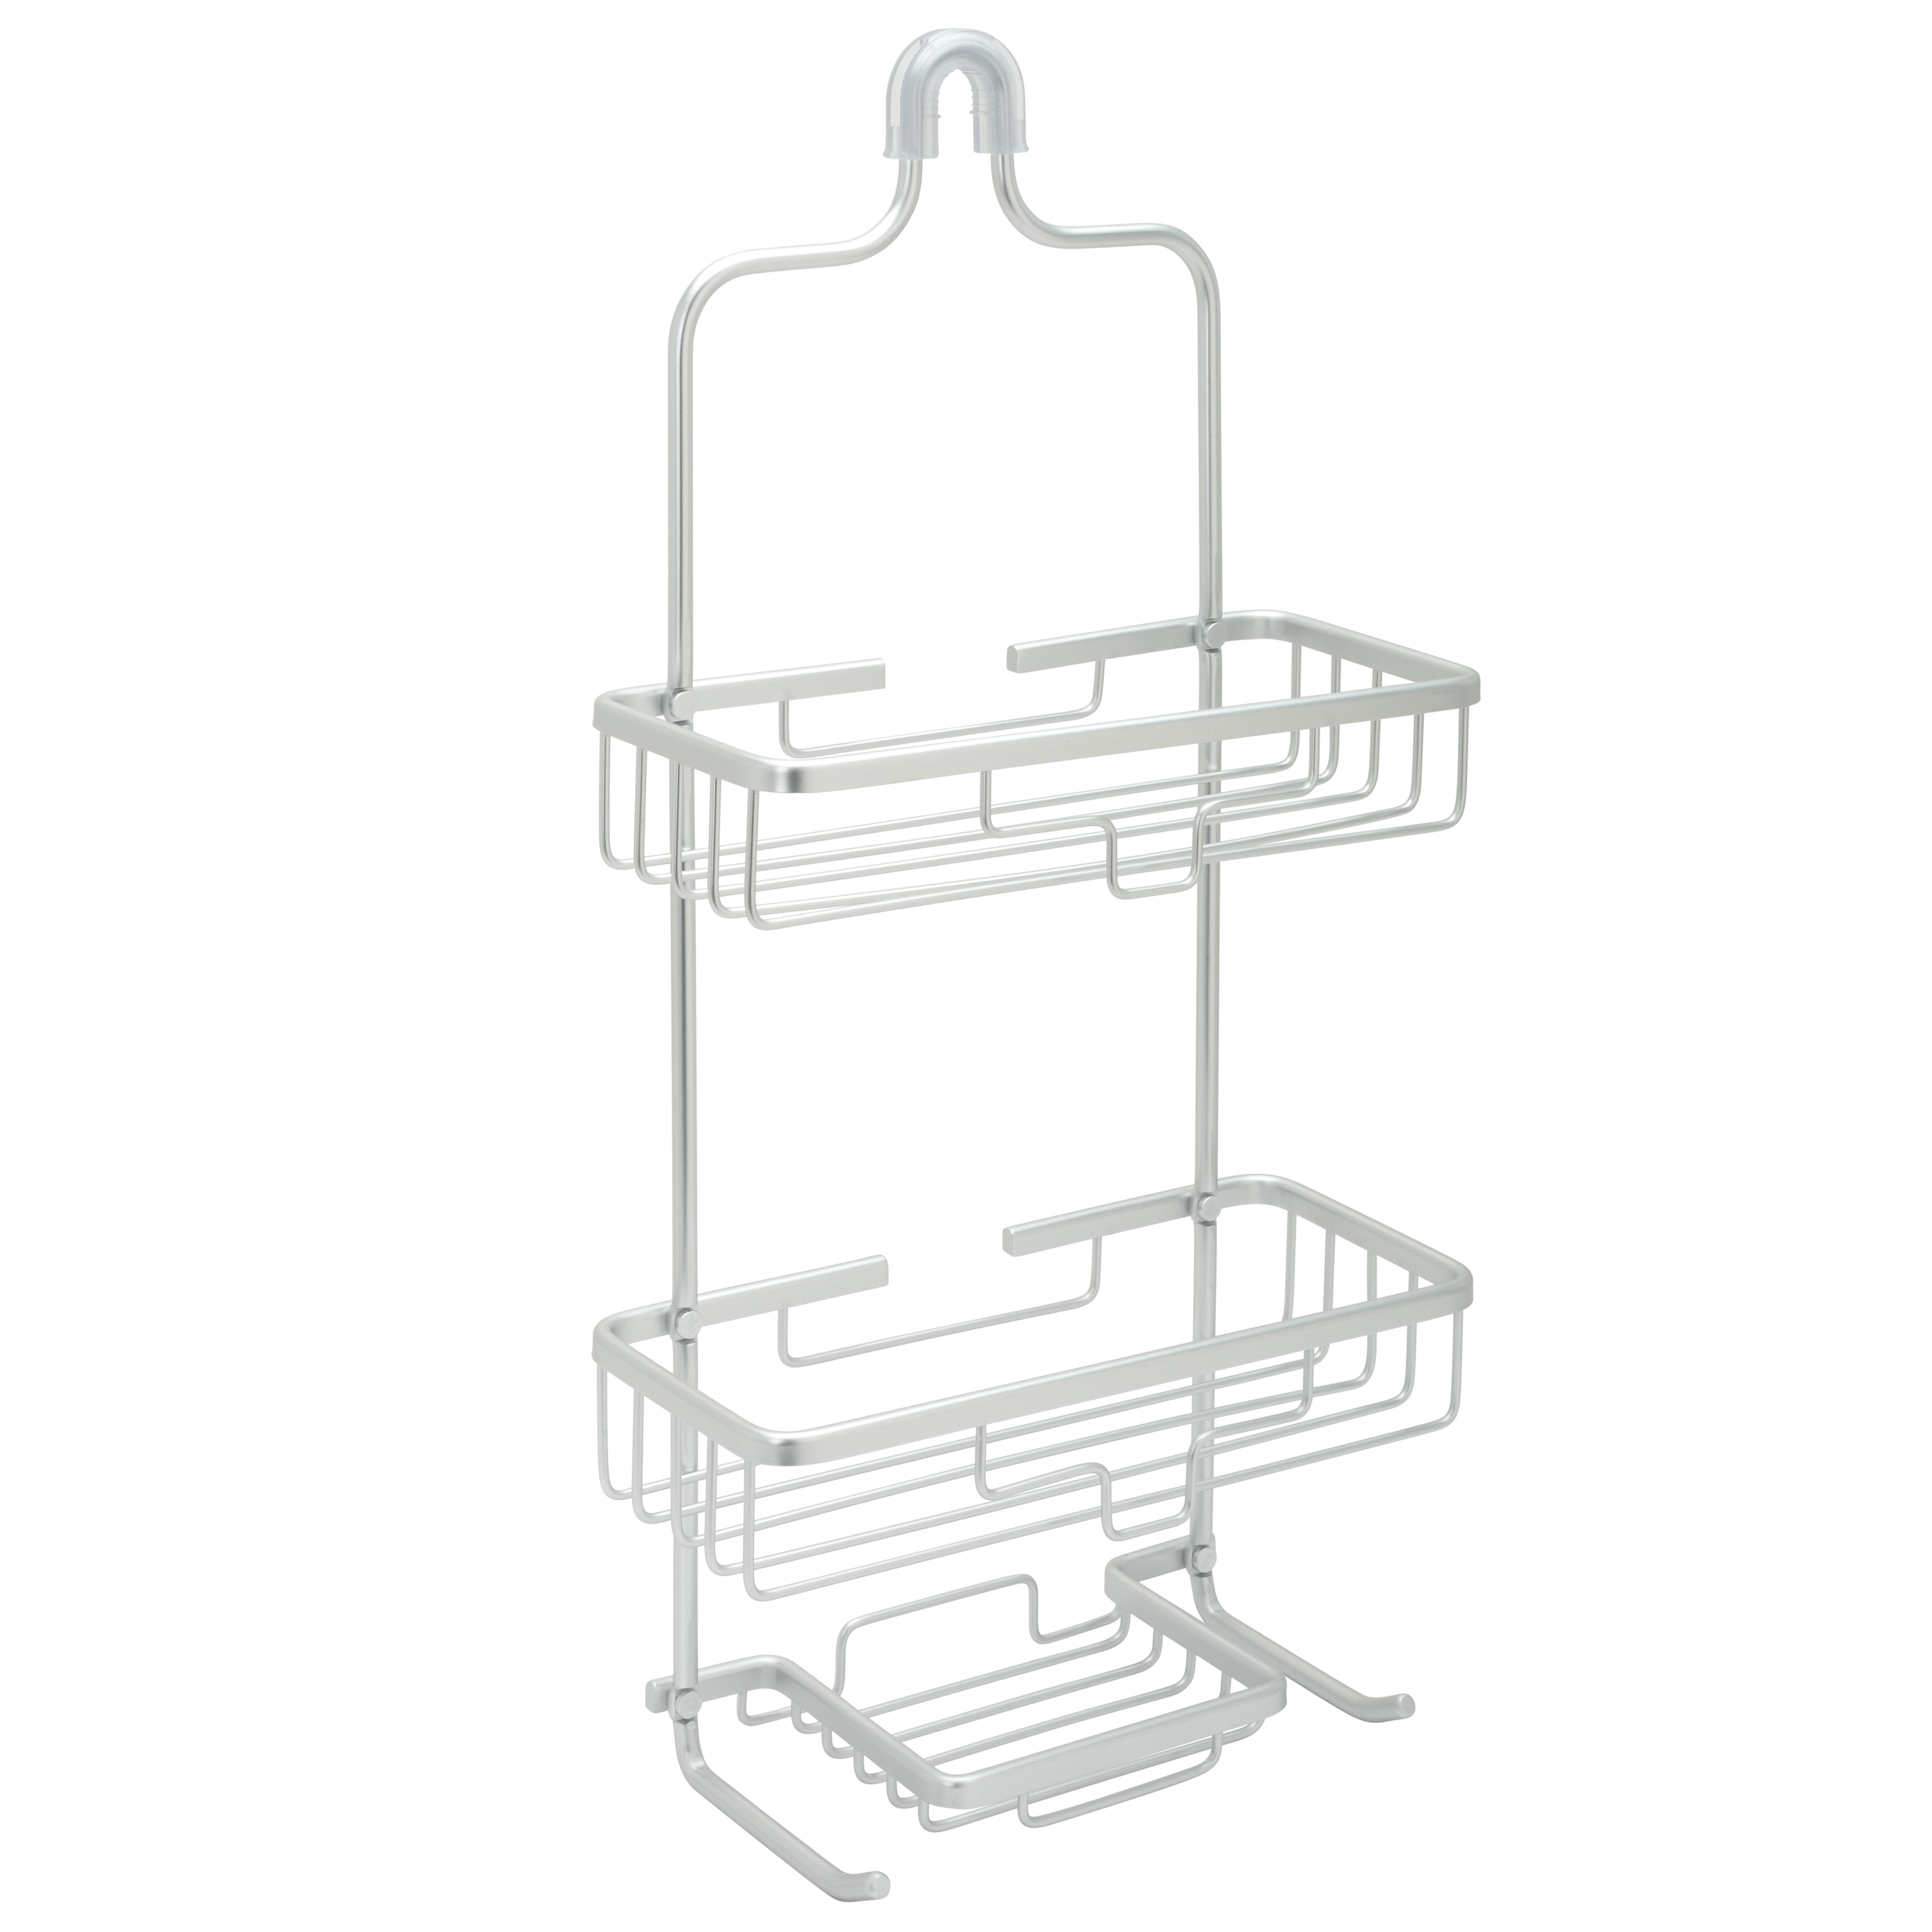 Hanging Shower Caddy Choose from 3 Colors! 